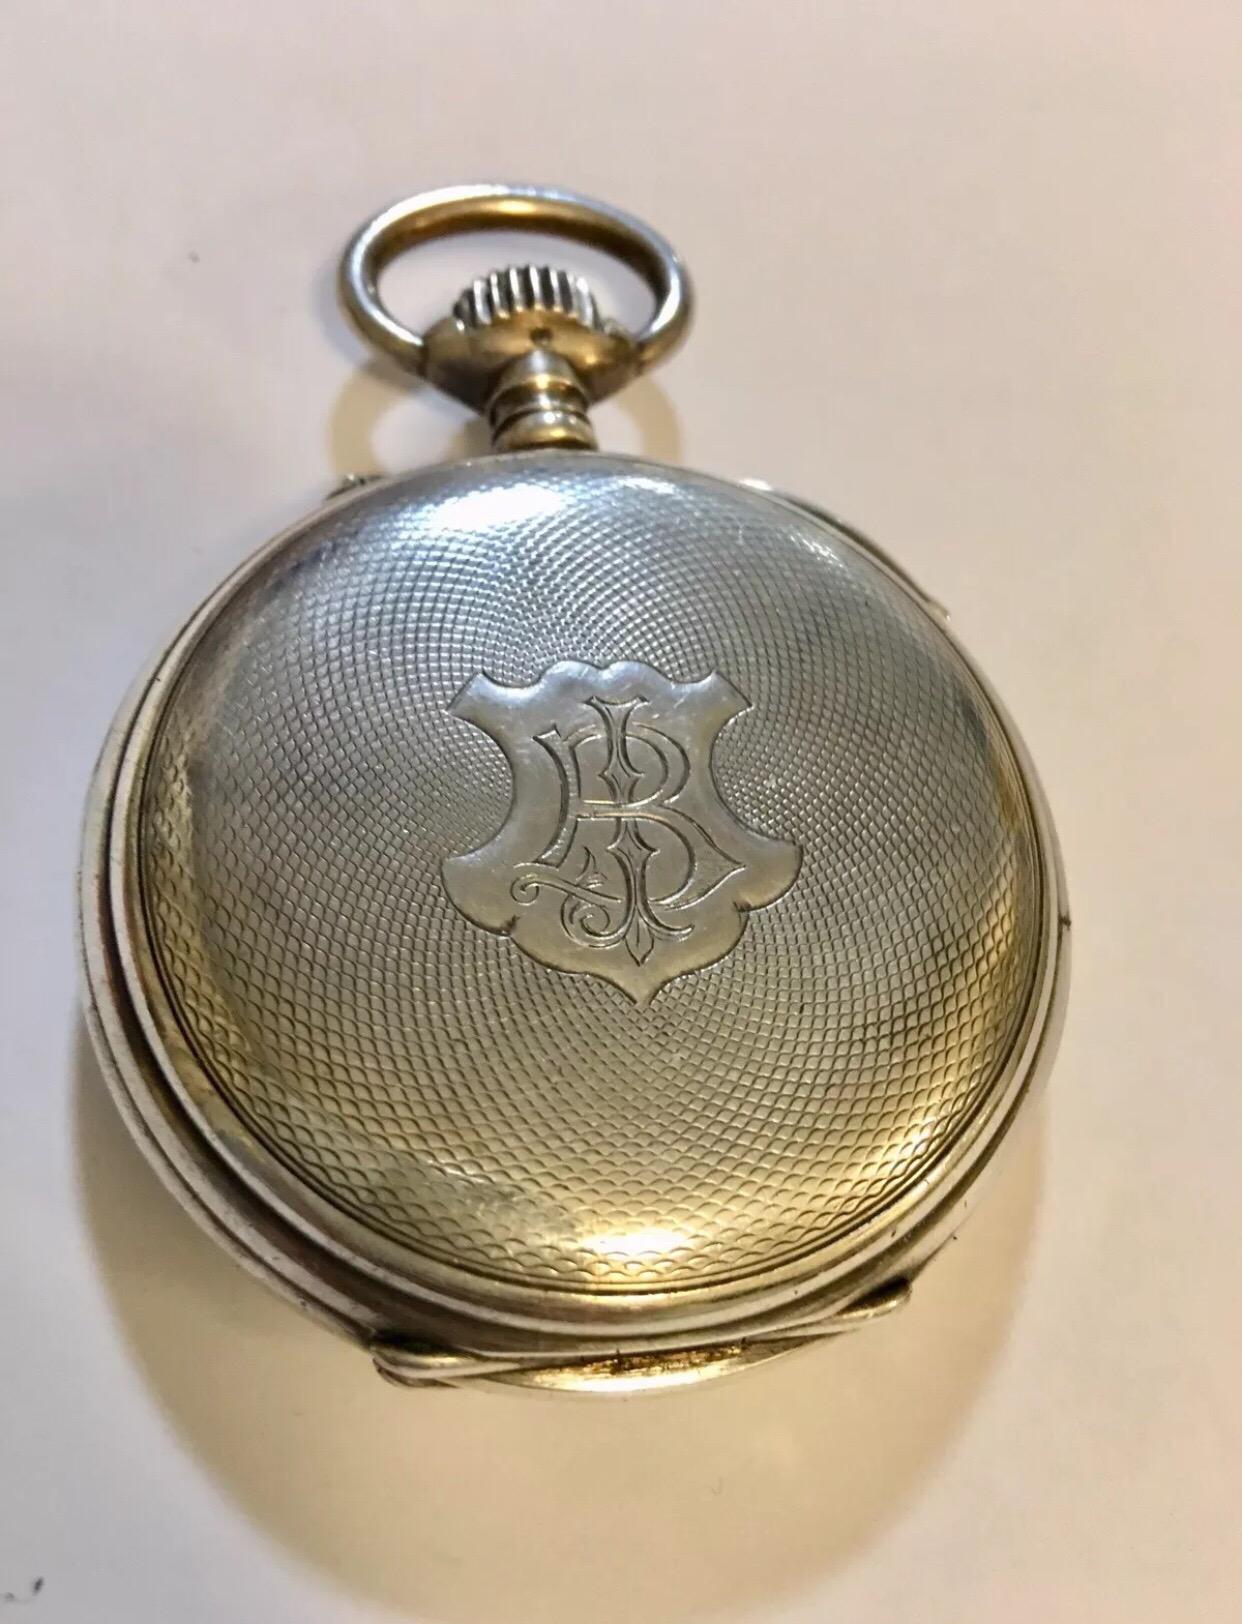 A Heavy silver Longines Pocket watch c.1880’s

it Won 3 gold medals and 7 silver medals in Paris Grand Prix exhibition in 1889. 

This watch is working and ticking well. the glass is missing. There’s a hairline crack across the dial